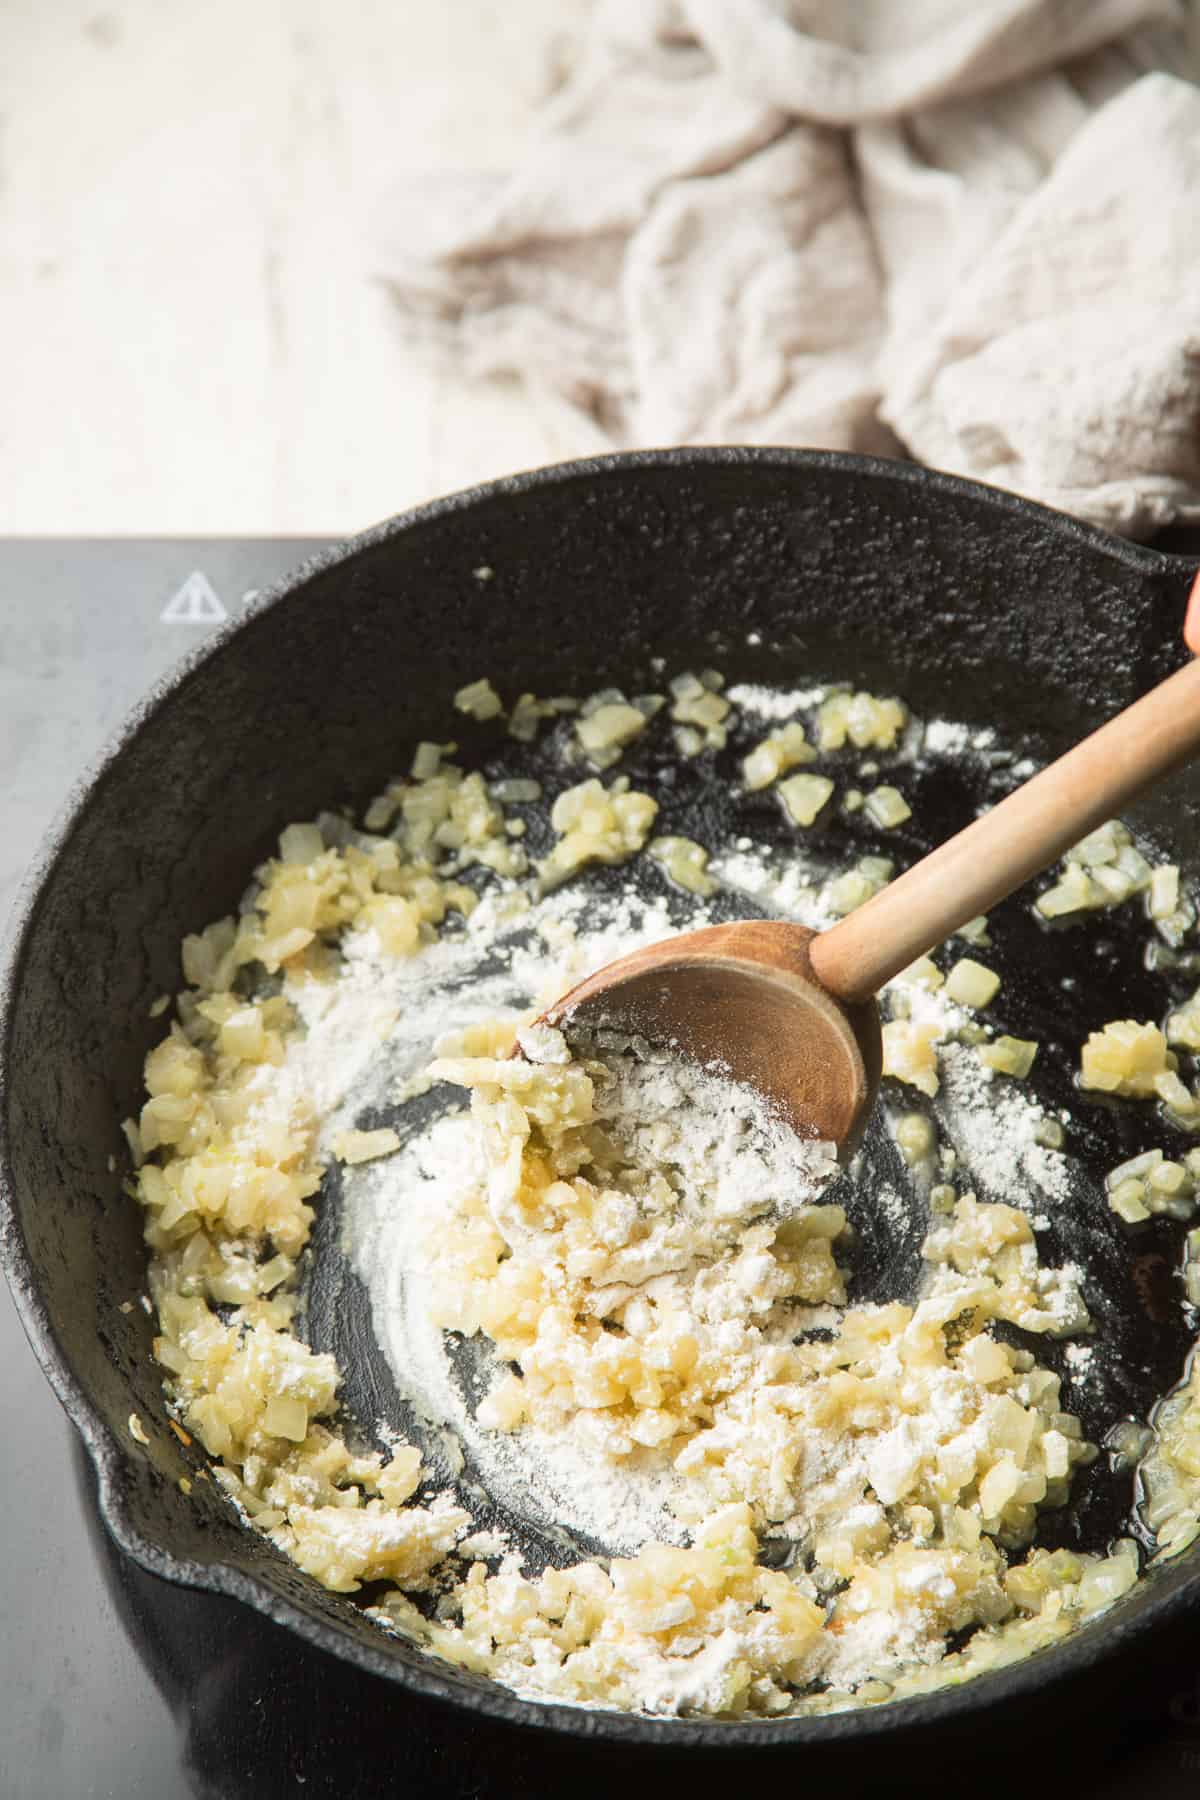 Flour and onions cooking in a skillet.